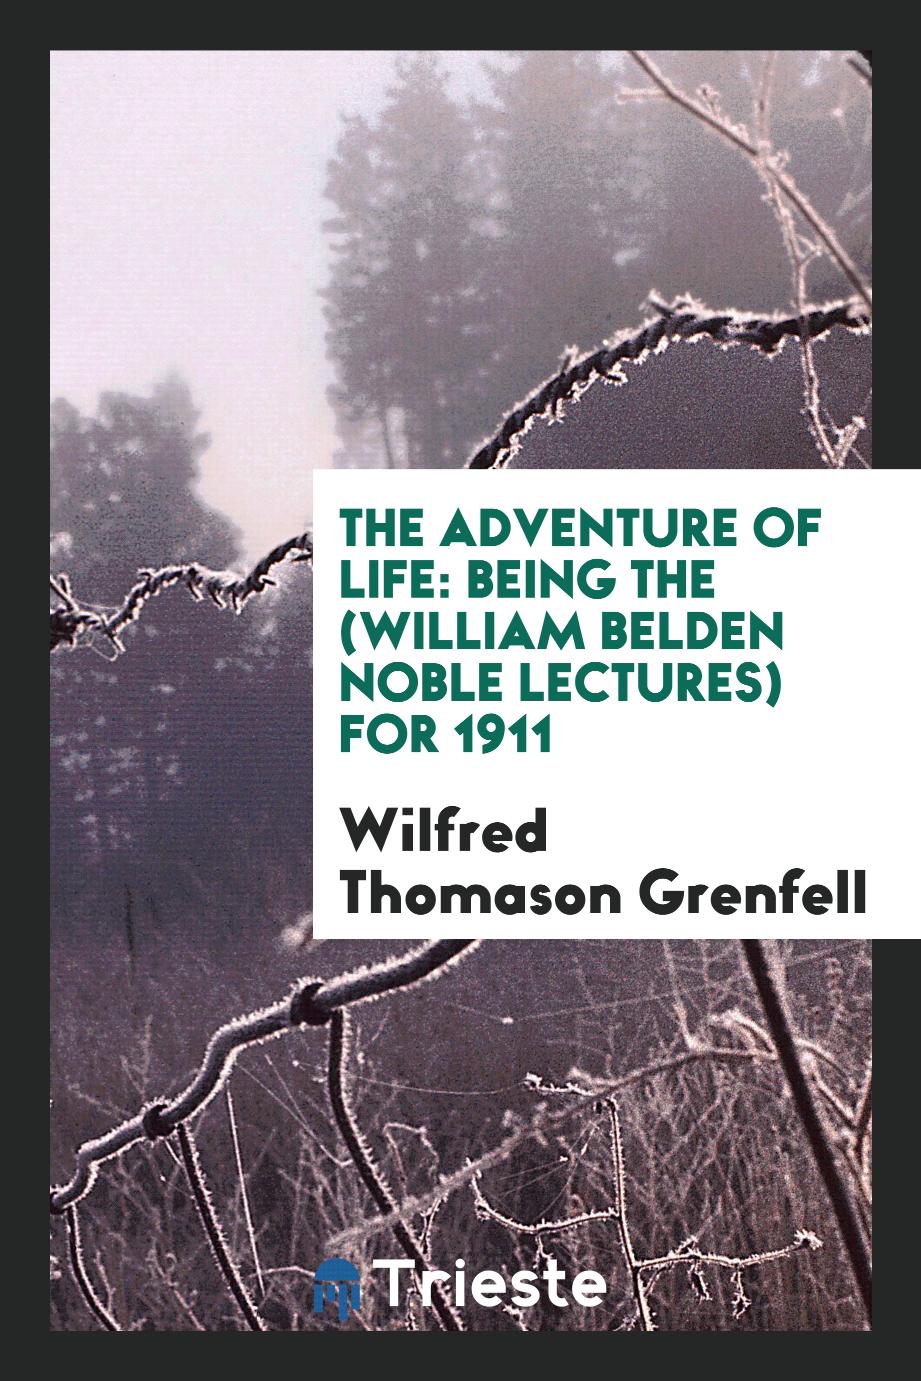 The Adventure of Life: Being the (William Belden Noble Lectures) for 1911